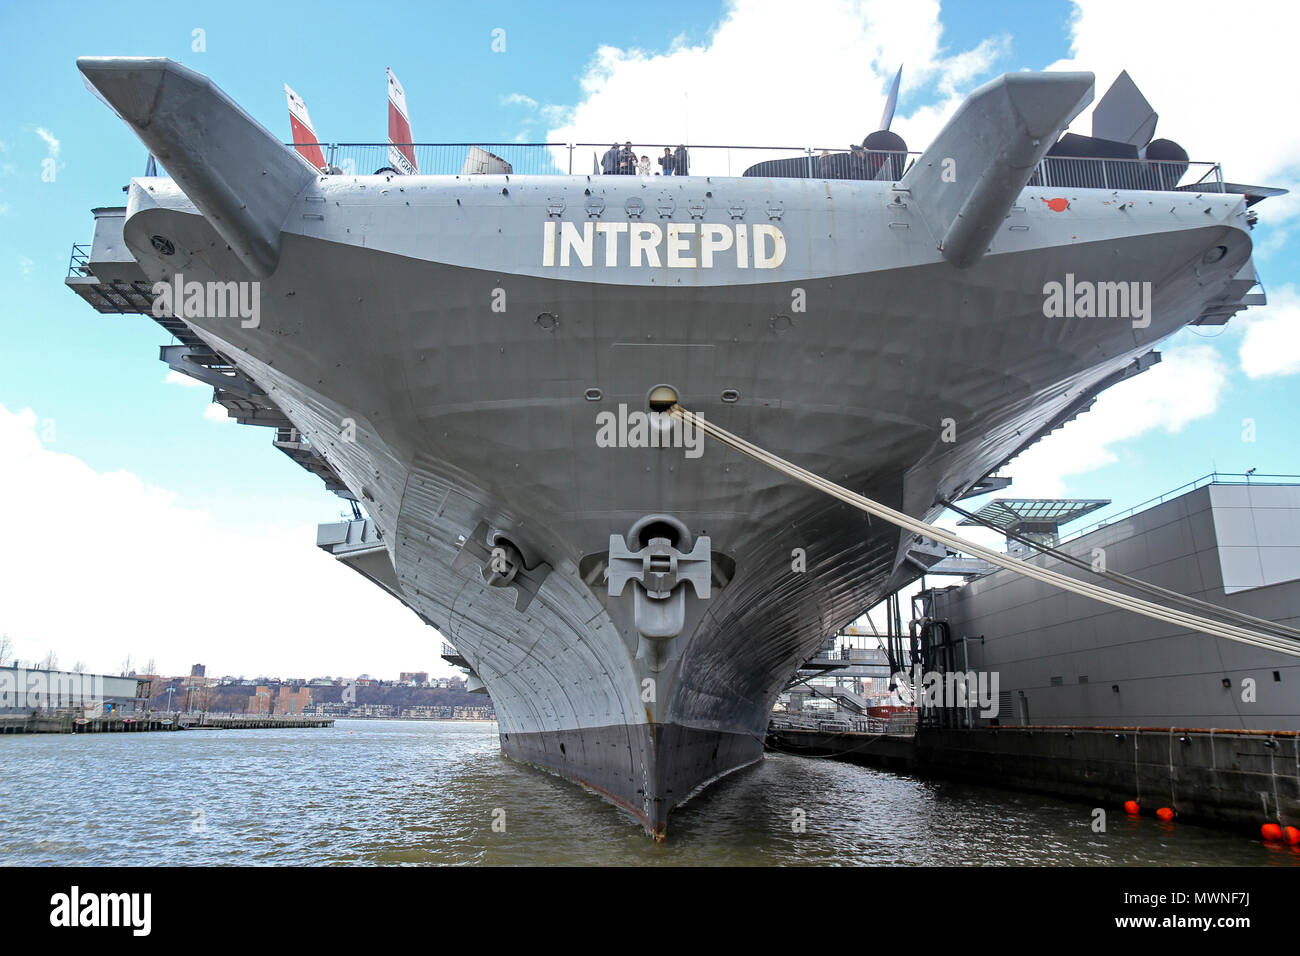 The aircraft carrier USS Intrepid, part of the Intrepid Sea, Air & Space Museum, Pier 86, Manhattan, New York City Stock Photo